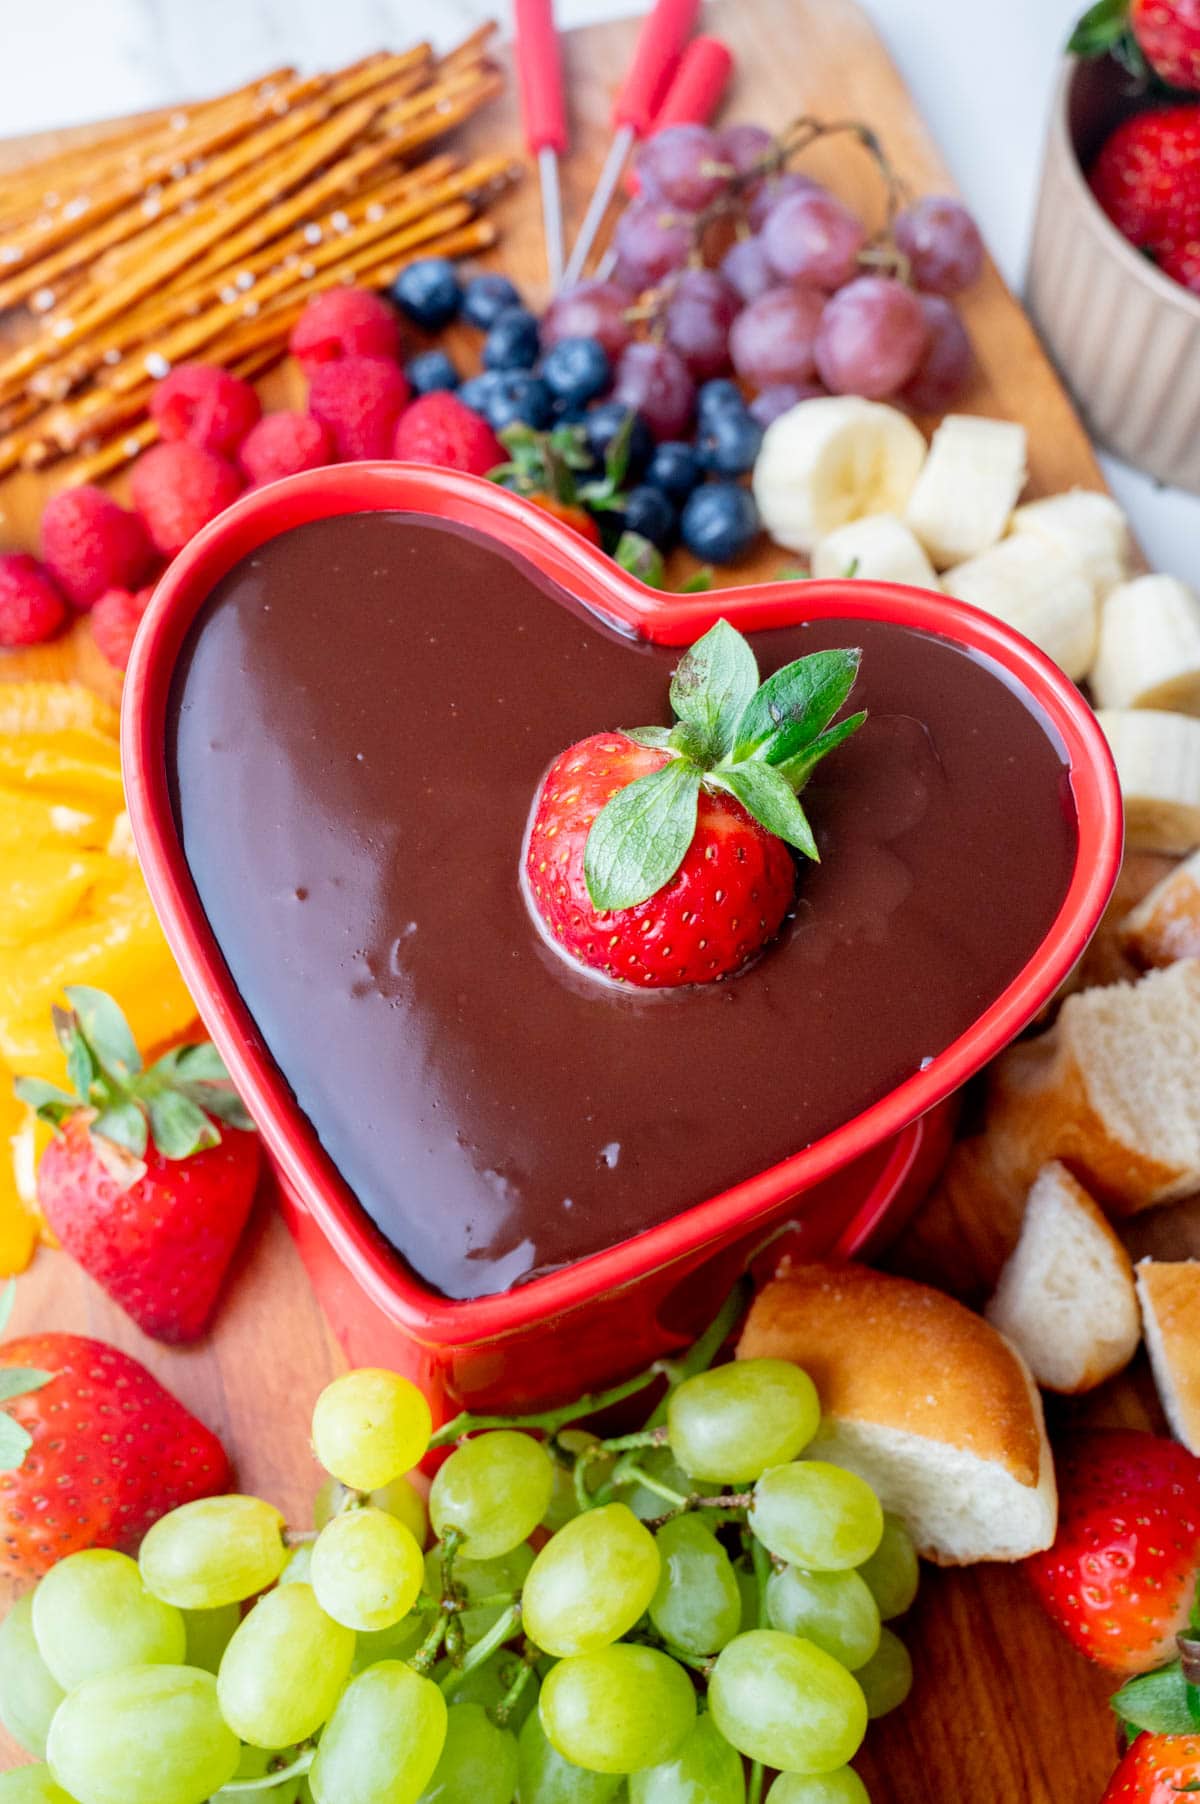 Chocolate fondue in a heart-shaped fondue bowl surrounded with fruit and baked good on a wooden board.